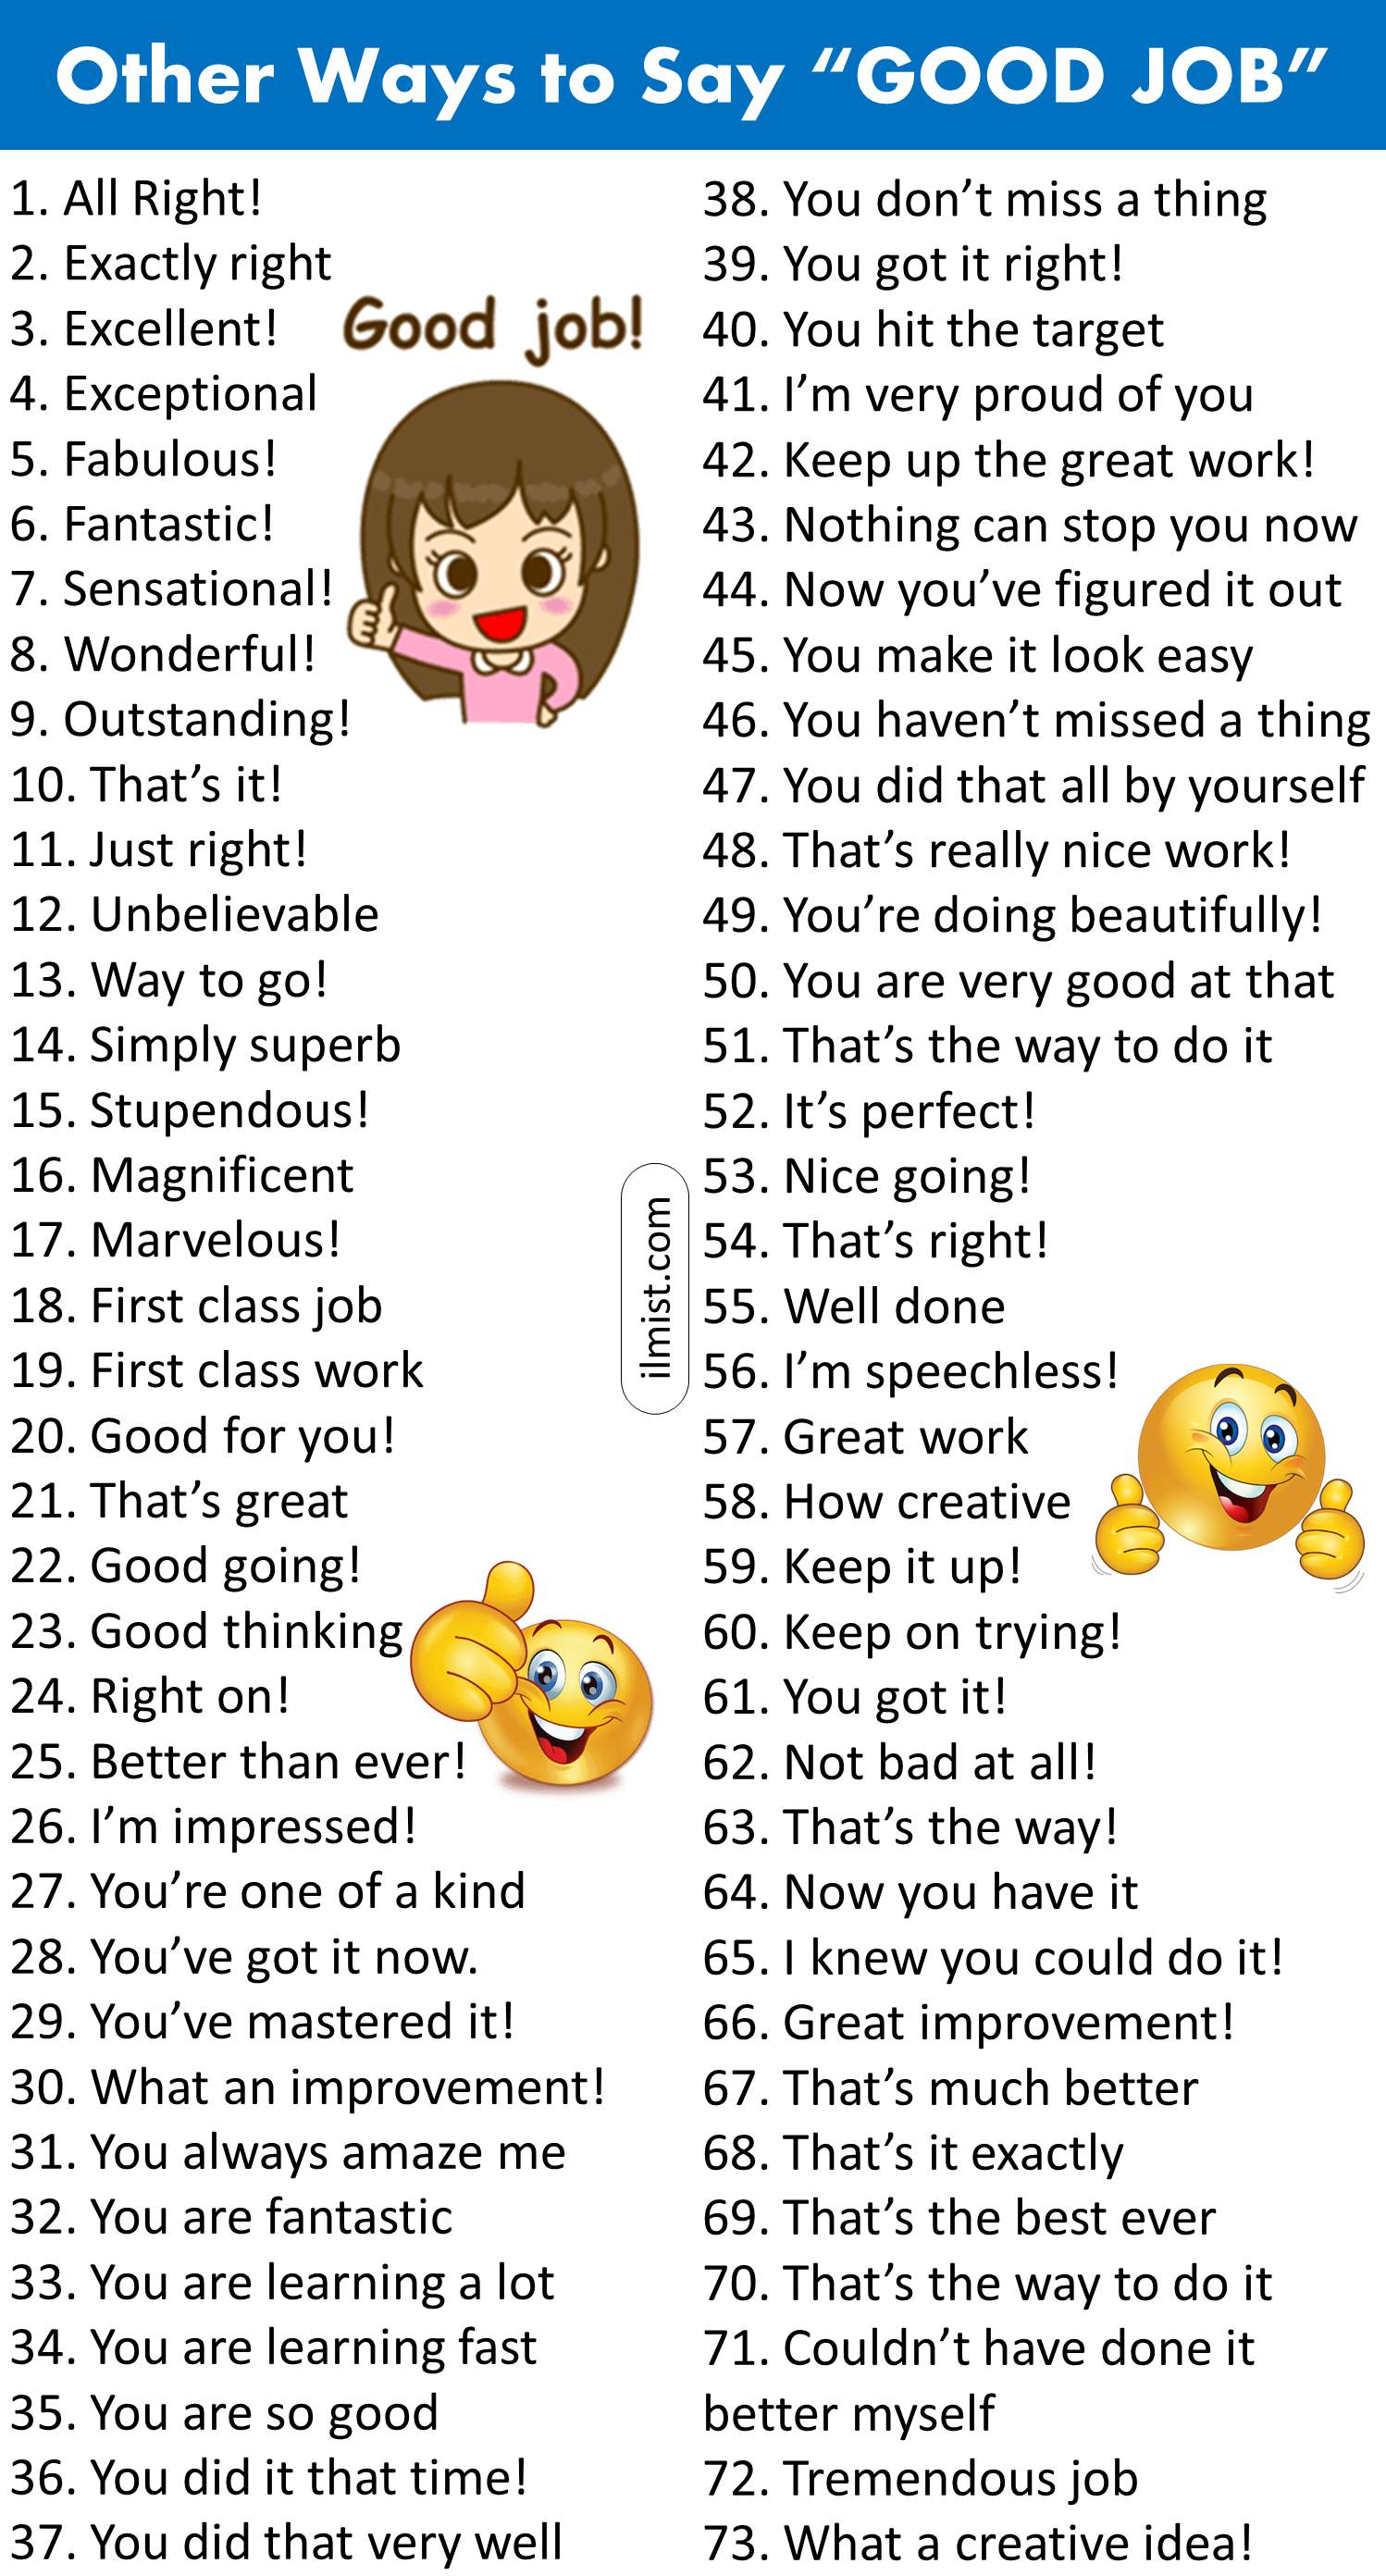 Other Ways To Say "GOOD JOB" | Synonyms Of Good Job